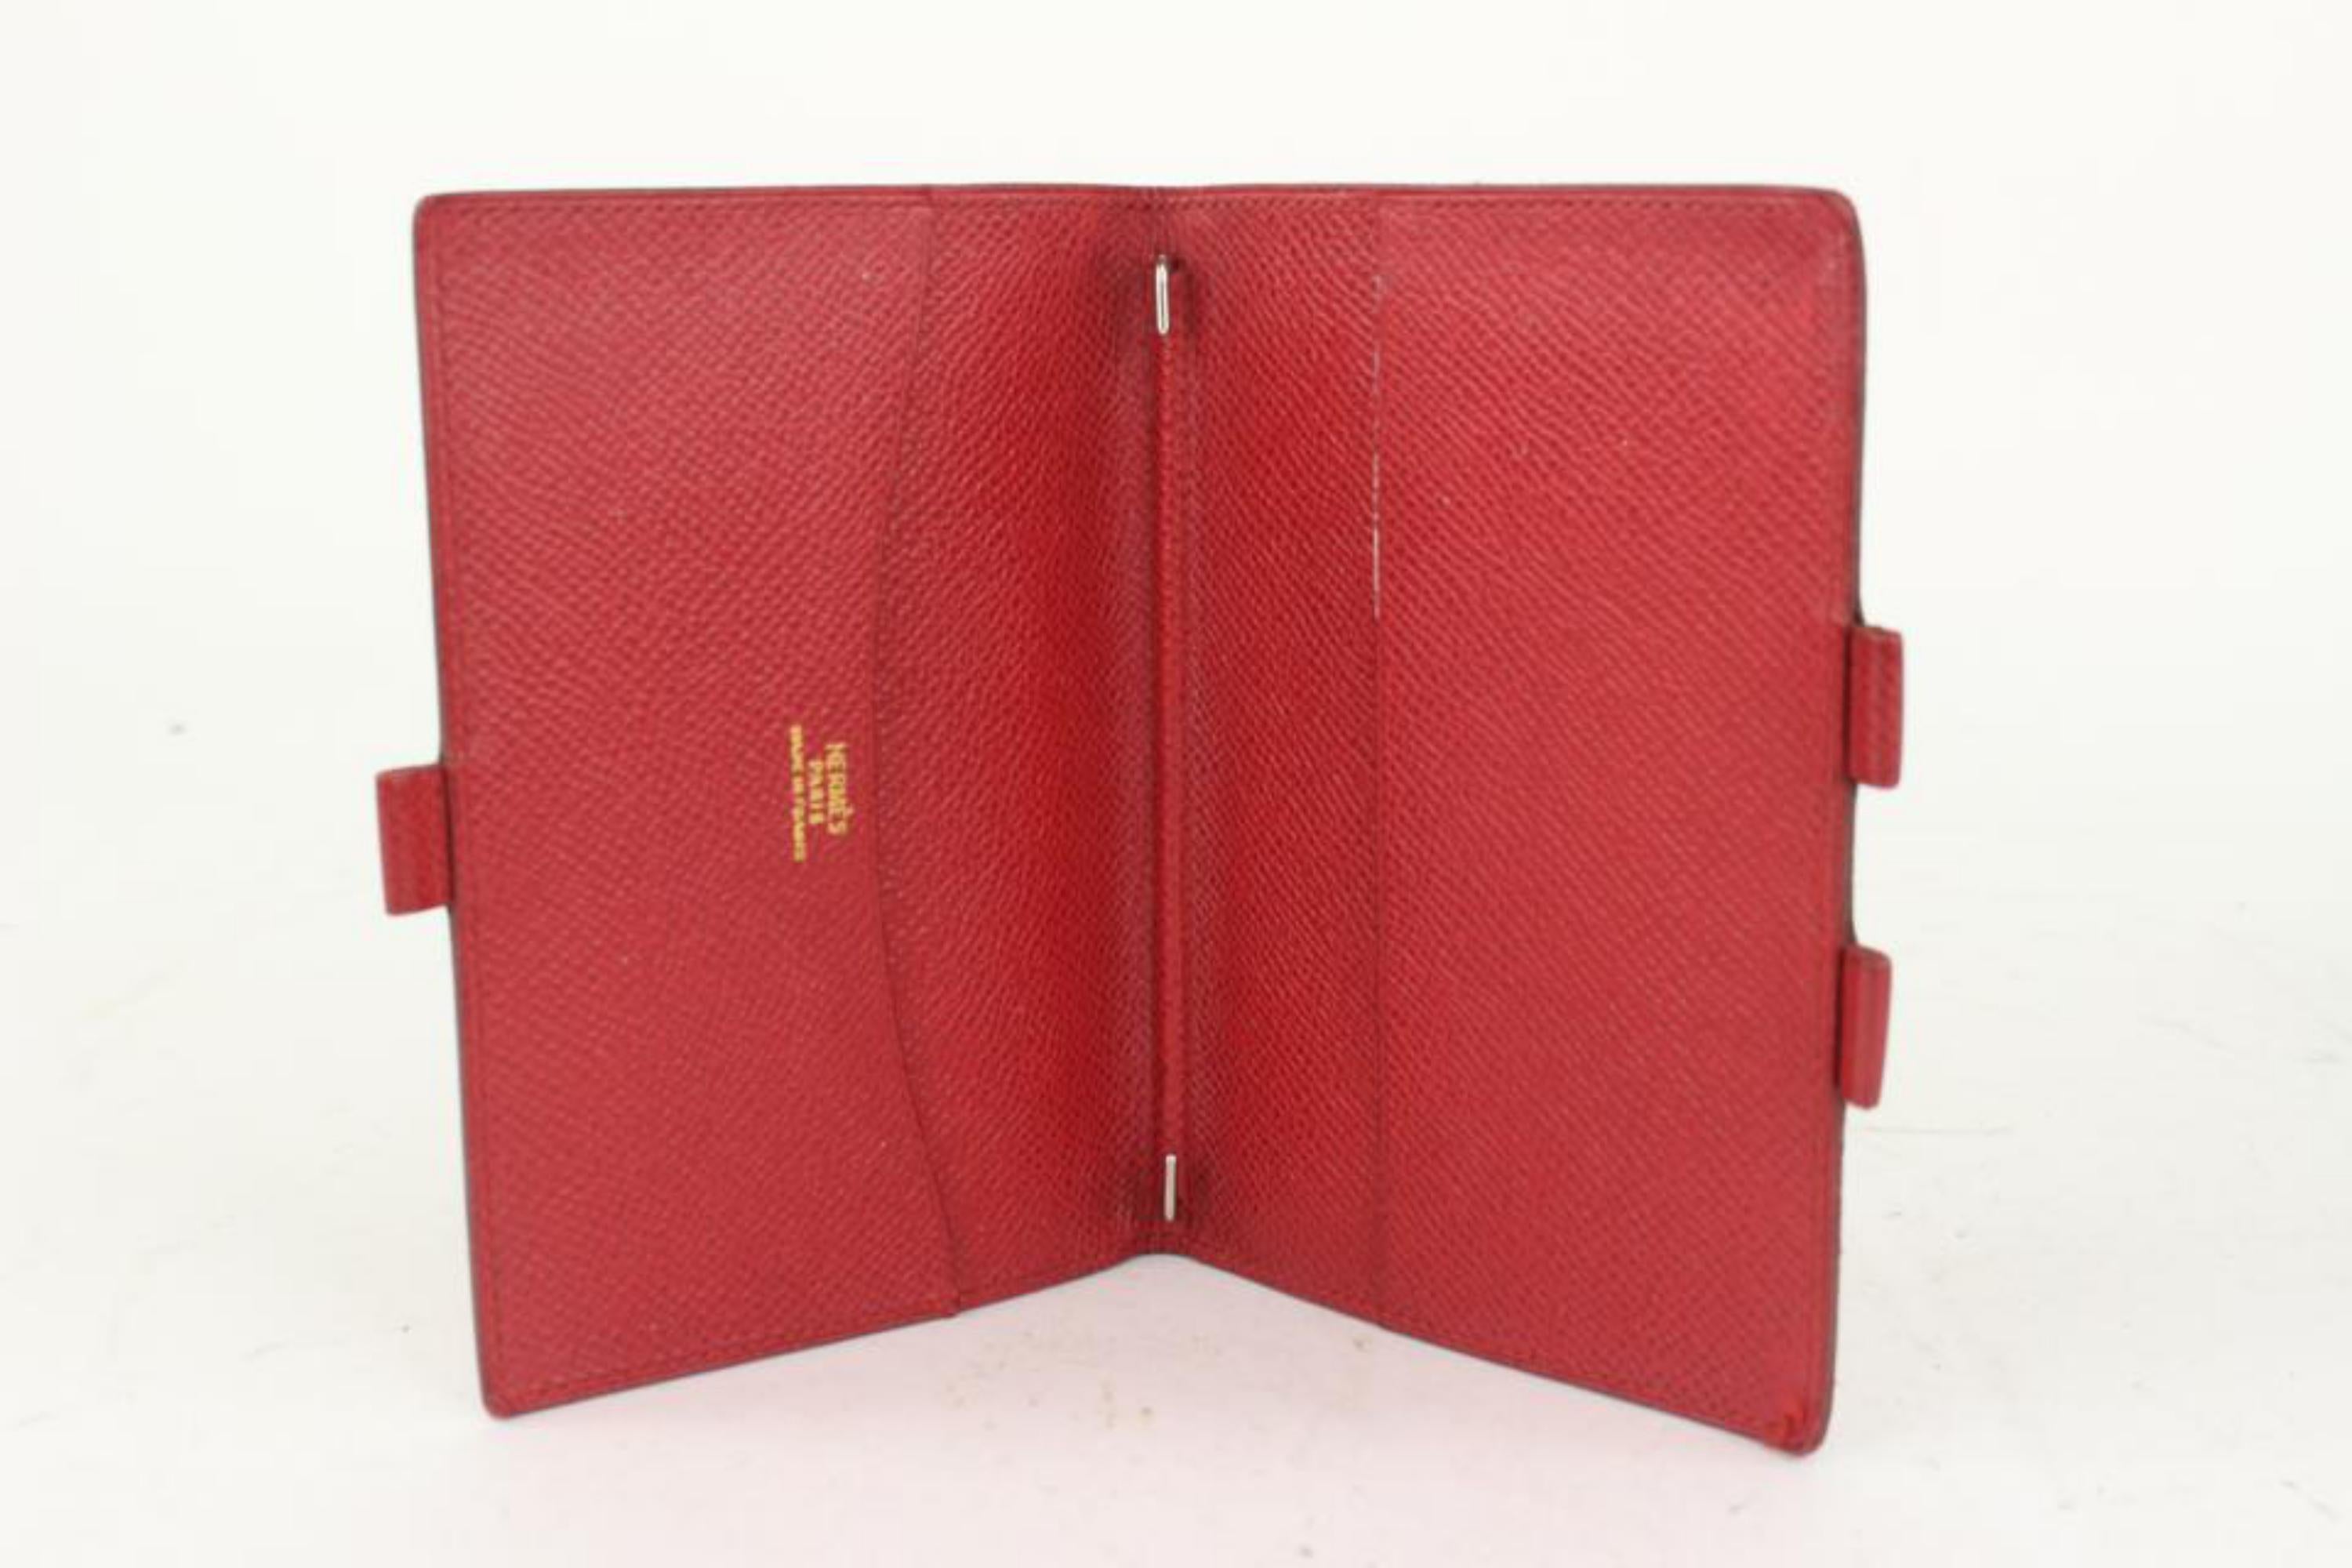 Hermès Small Red Epsom Leather Agenda 1020h36 For Sale 6